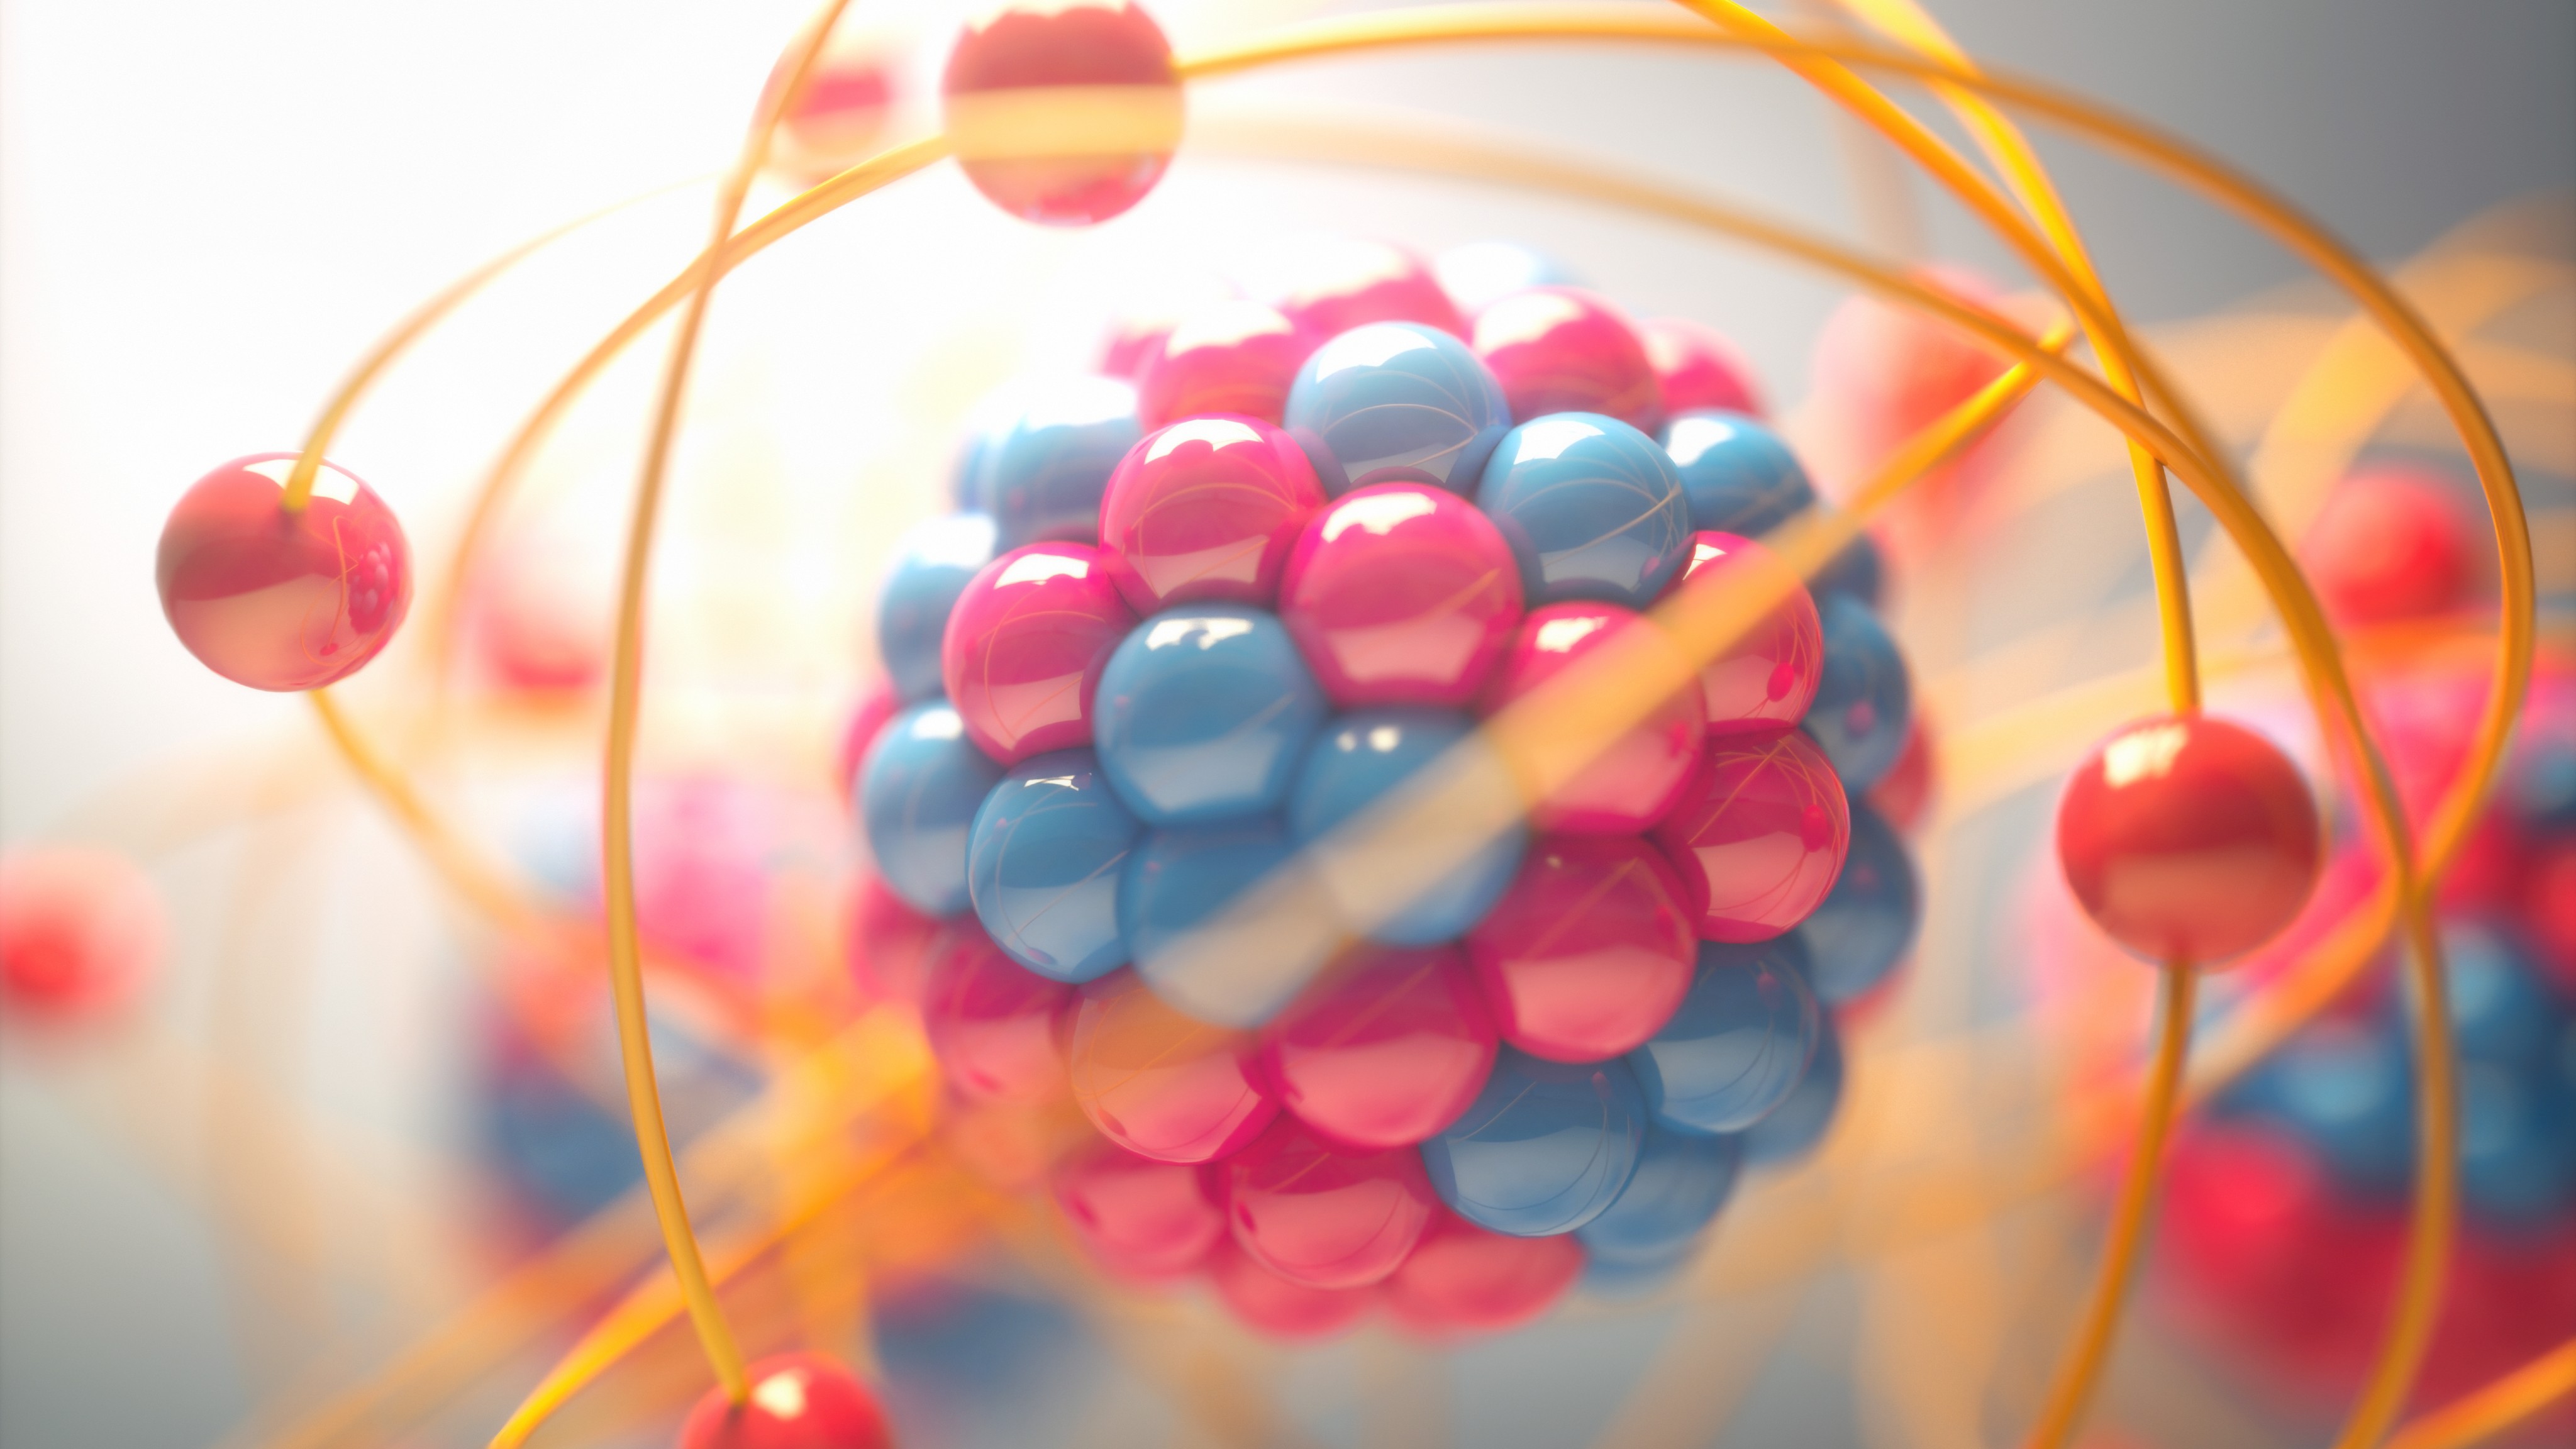 A colorful image of an atom's nuclear